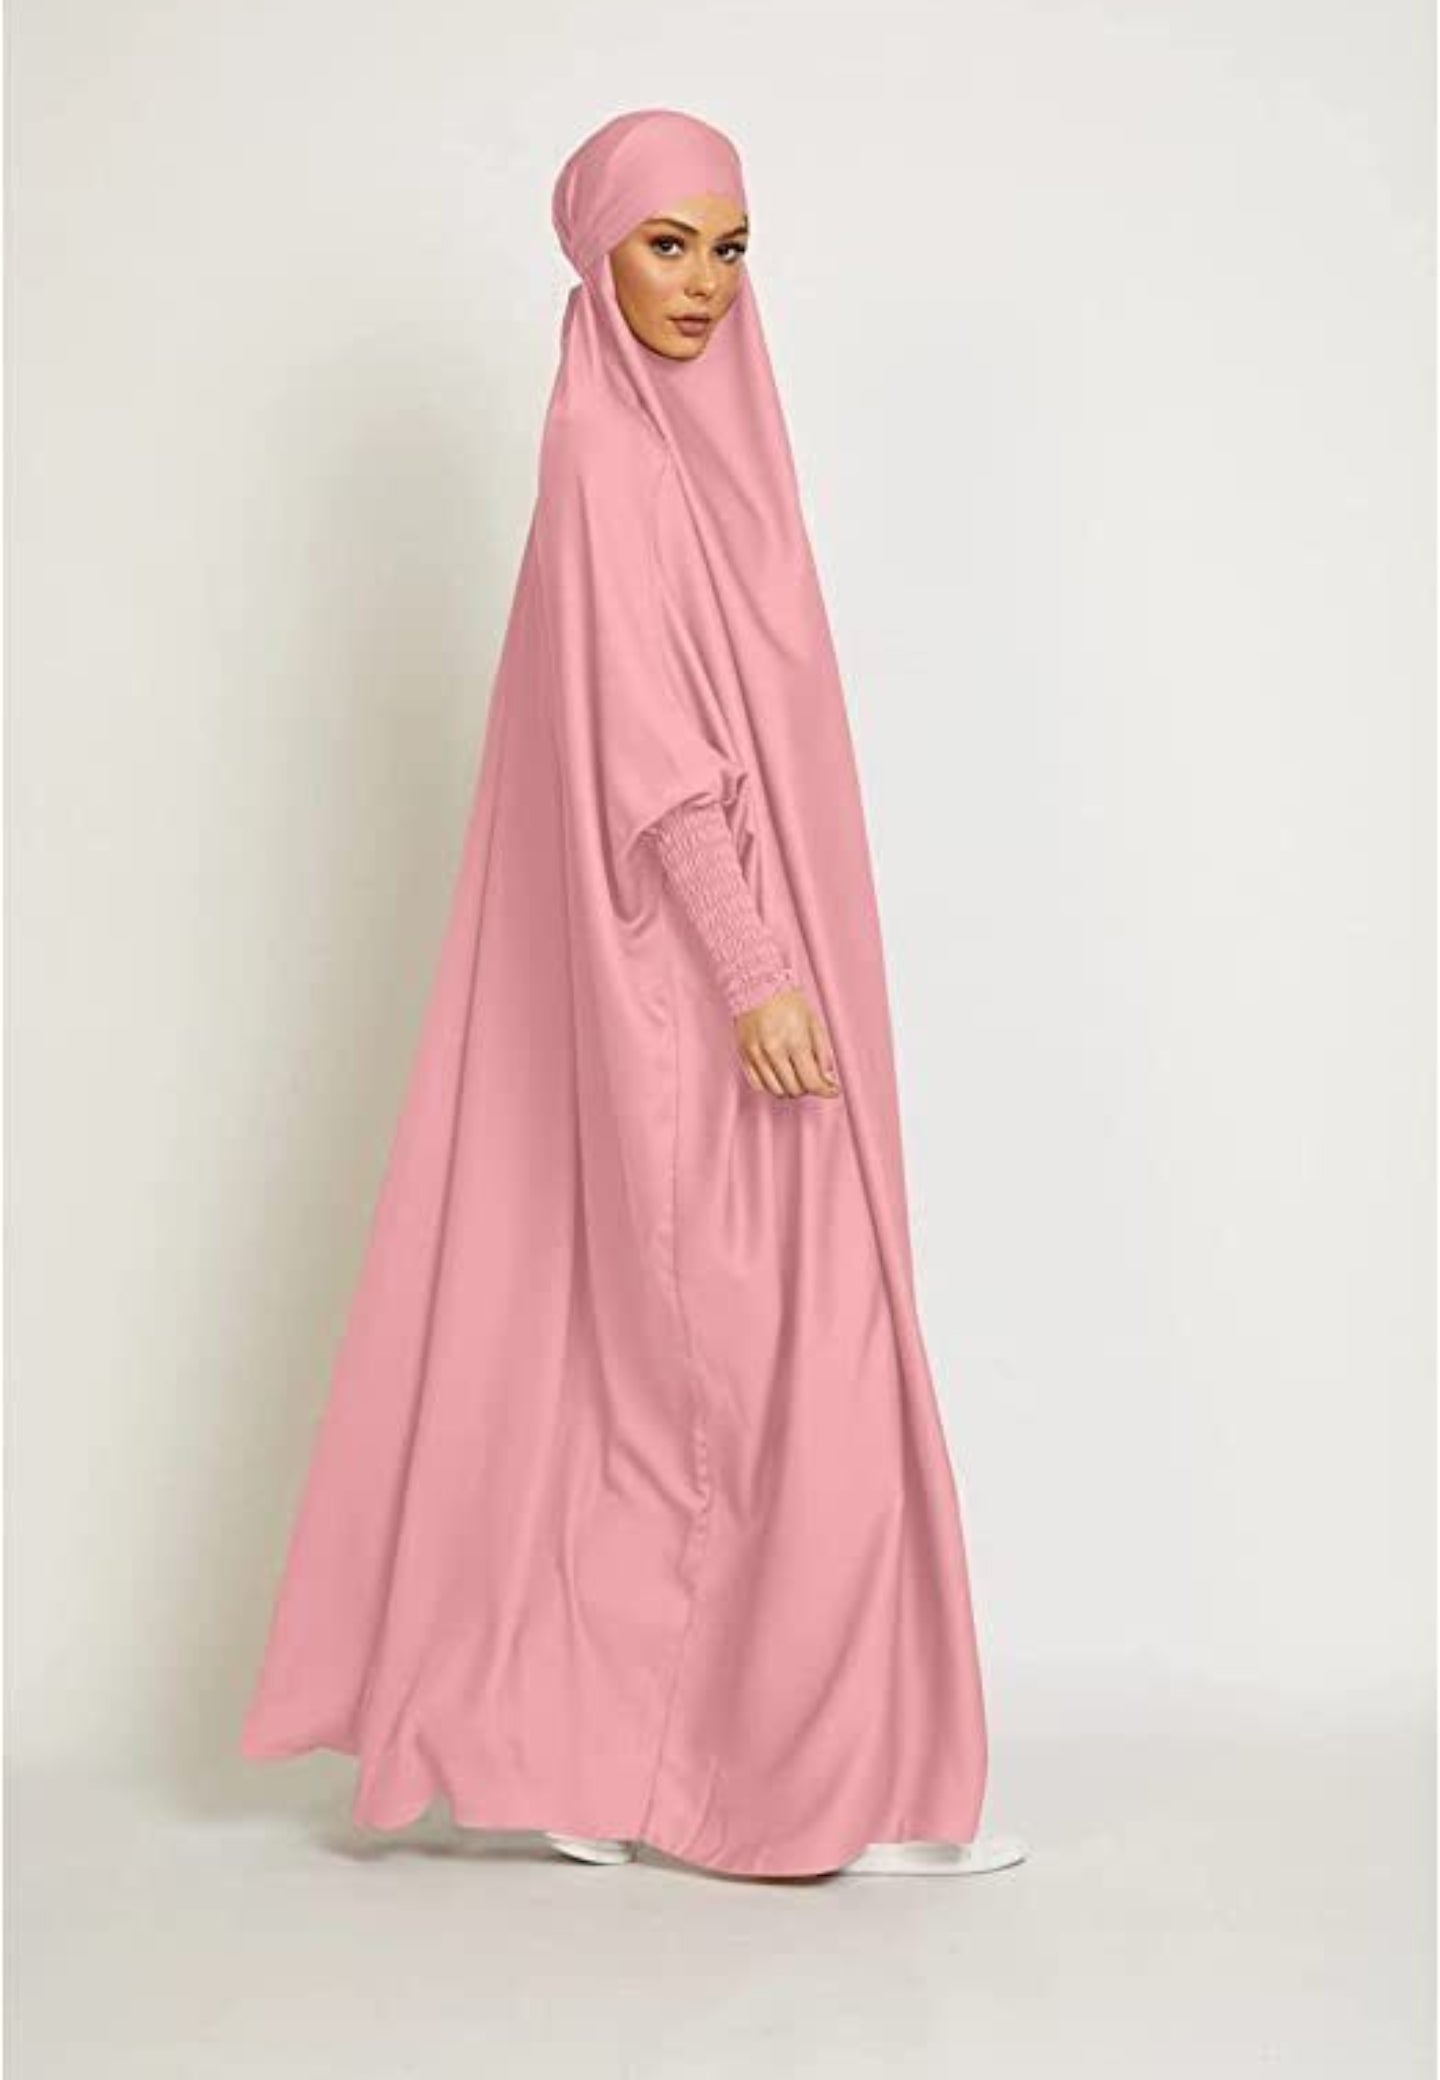 Embark on a voyage of serene beauty with our Pink Daisy One Piece Tie-Up Jilbab. Meticulously designed to harmonize modesty with contemporary allure, this exclusive Islamic garment offers a captivating symphony of grace and comfort for your sacred moments of devotion.